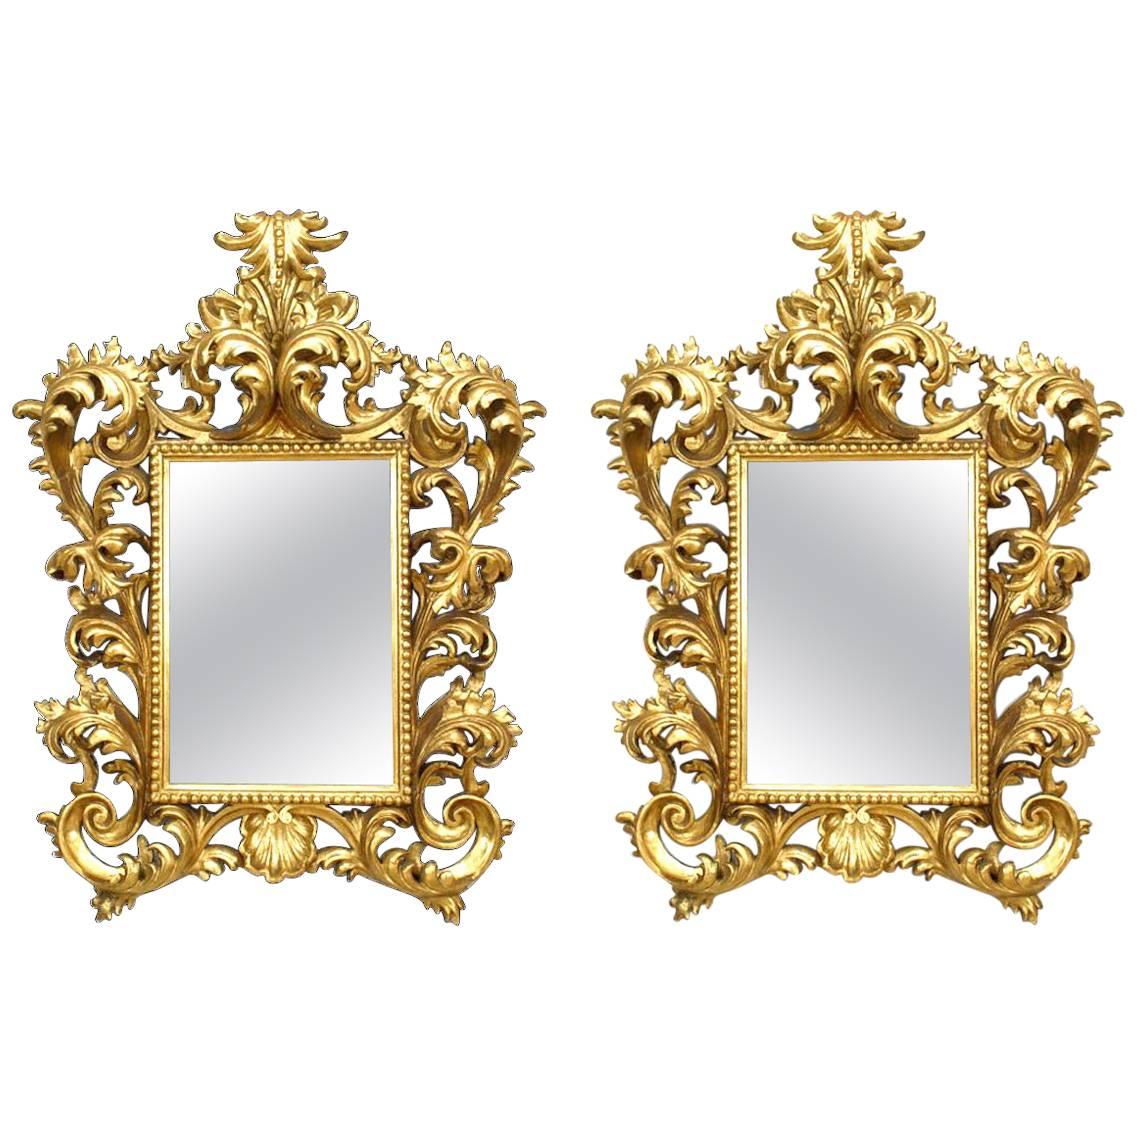 Pair of Italian Rococo Style Giltwood Wall Mirrors